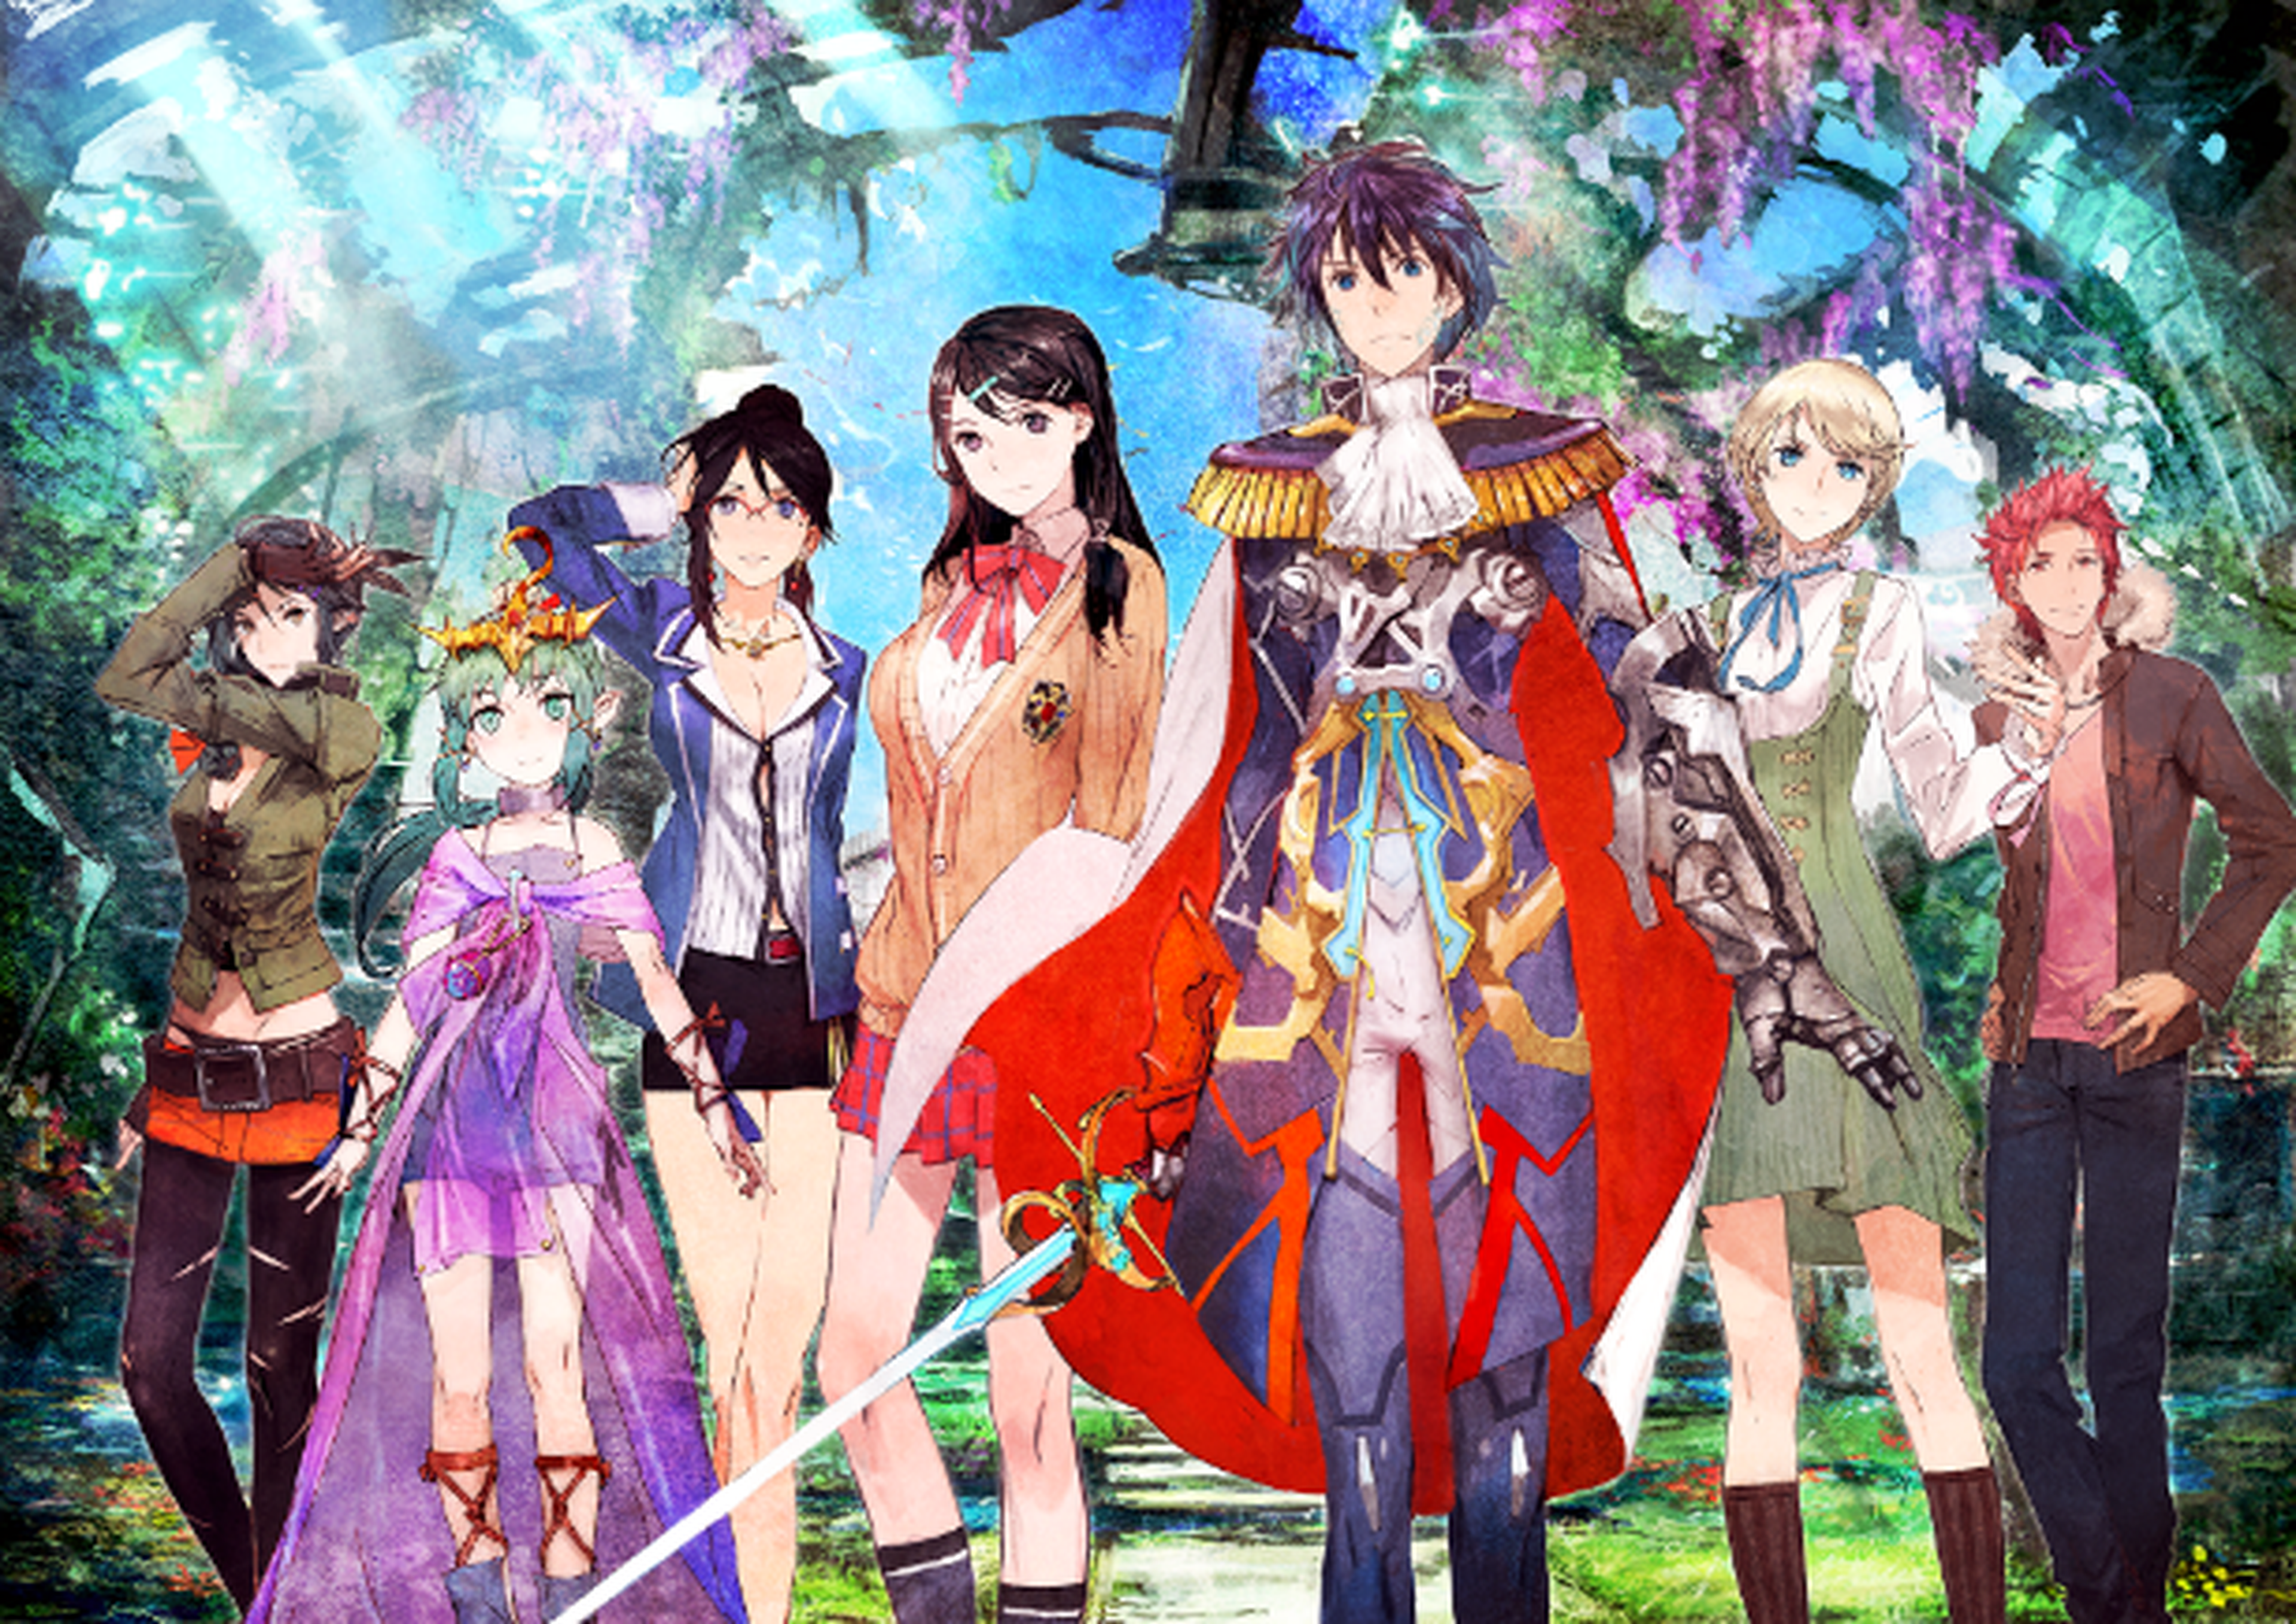 Tokyo Mirage Sessions #FE - Avance para Wii U